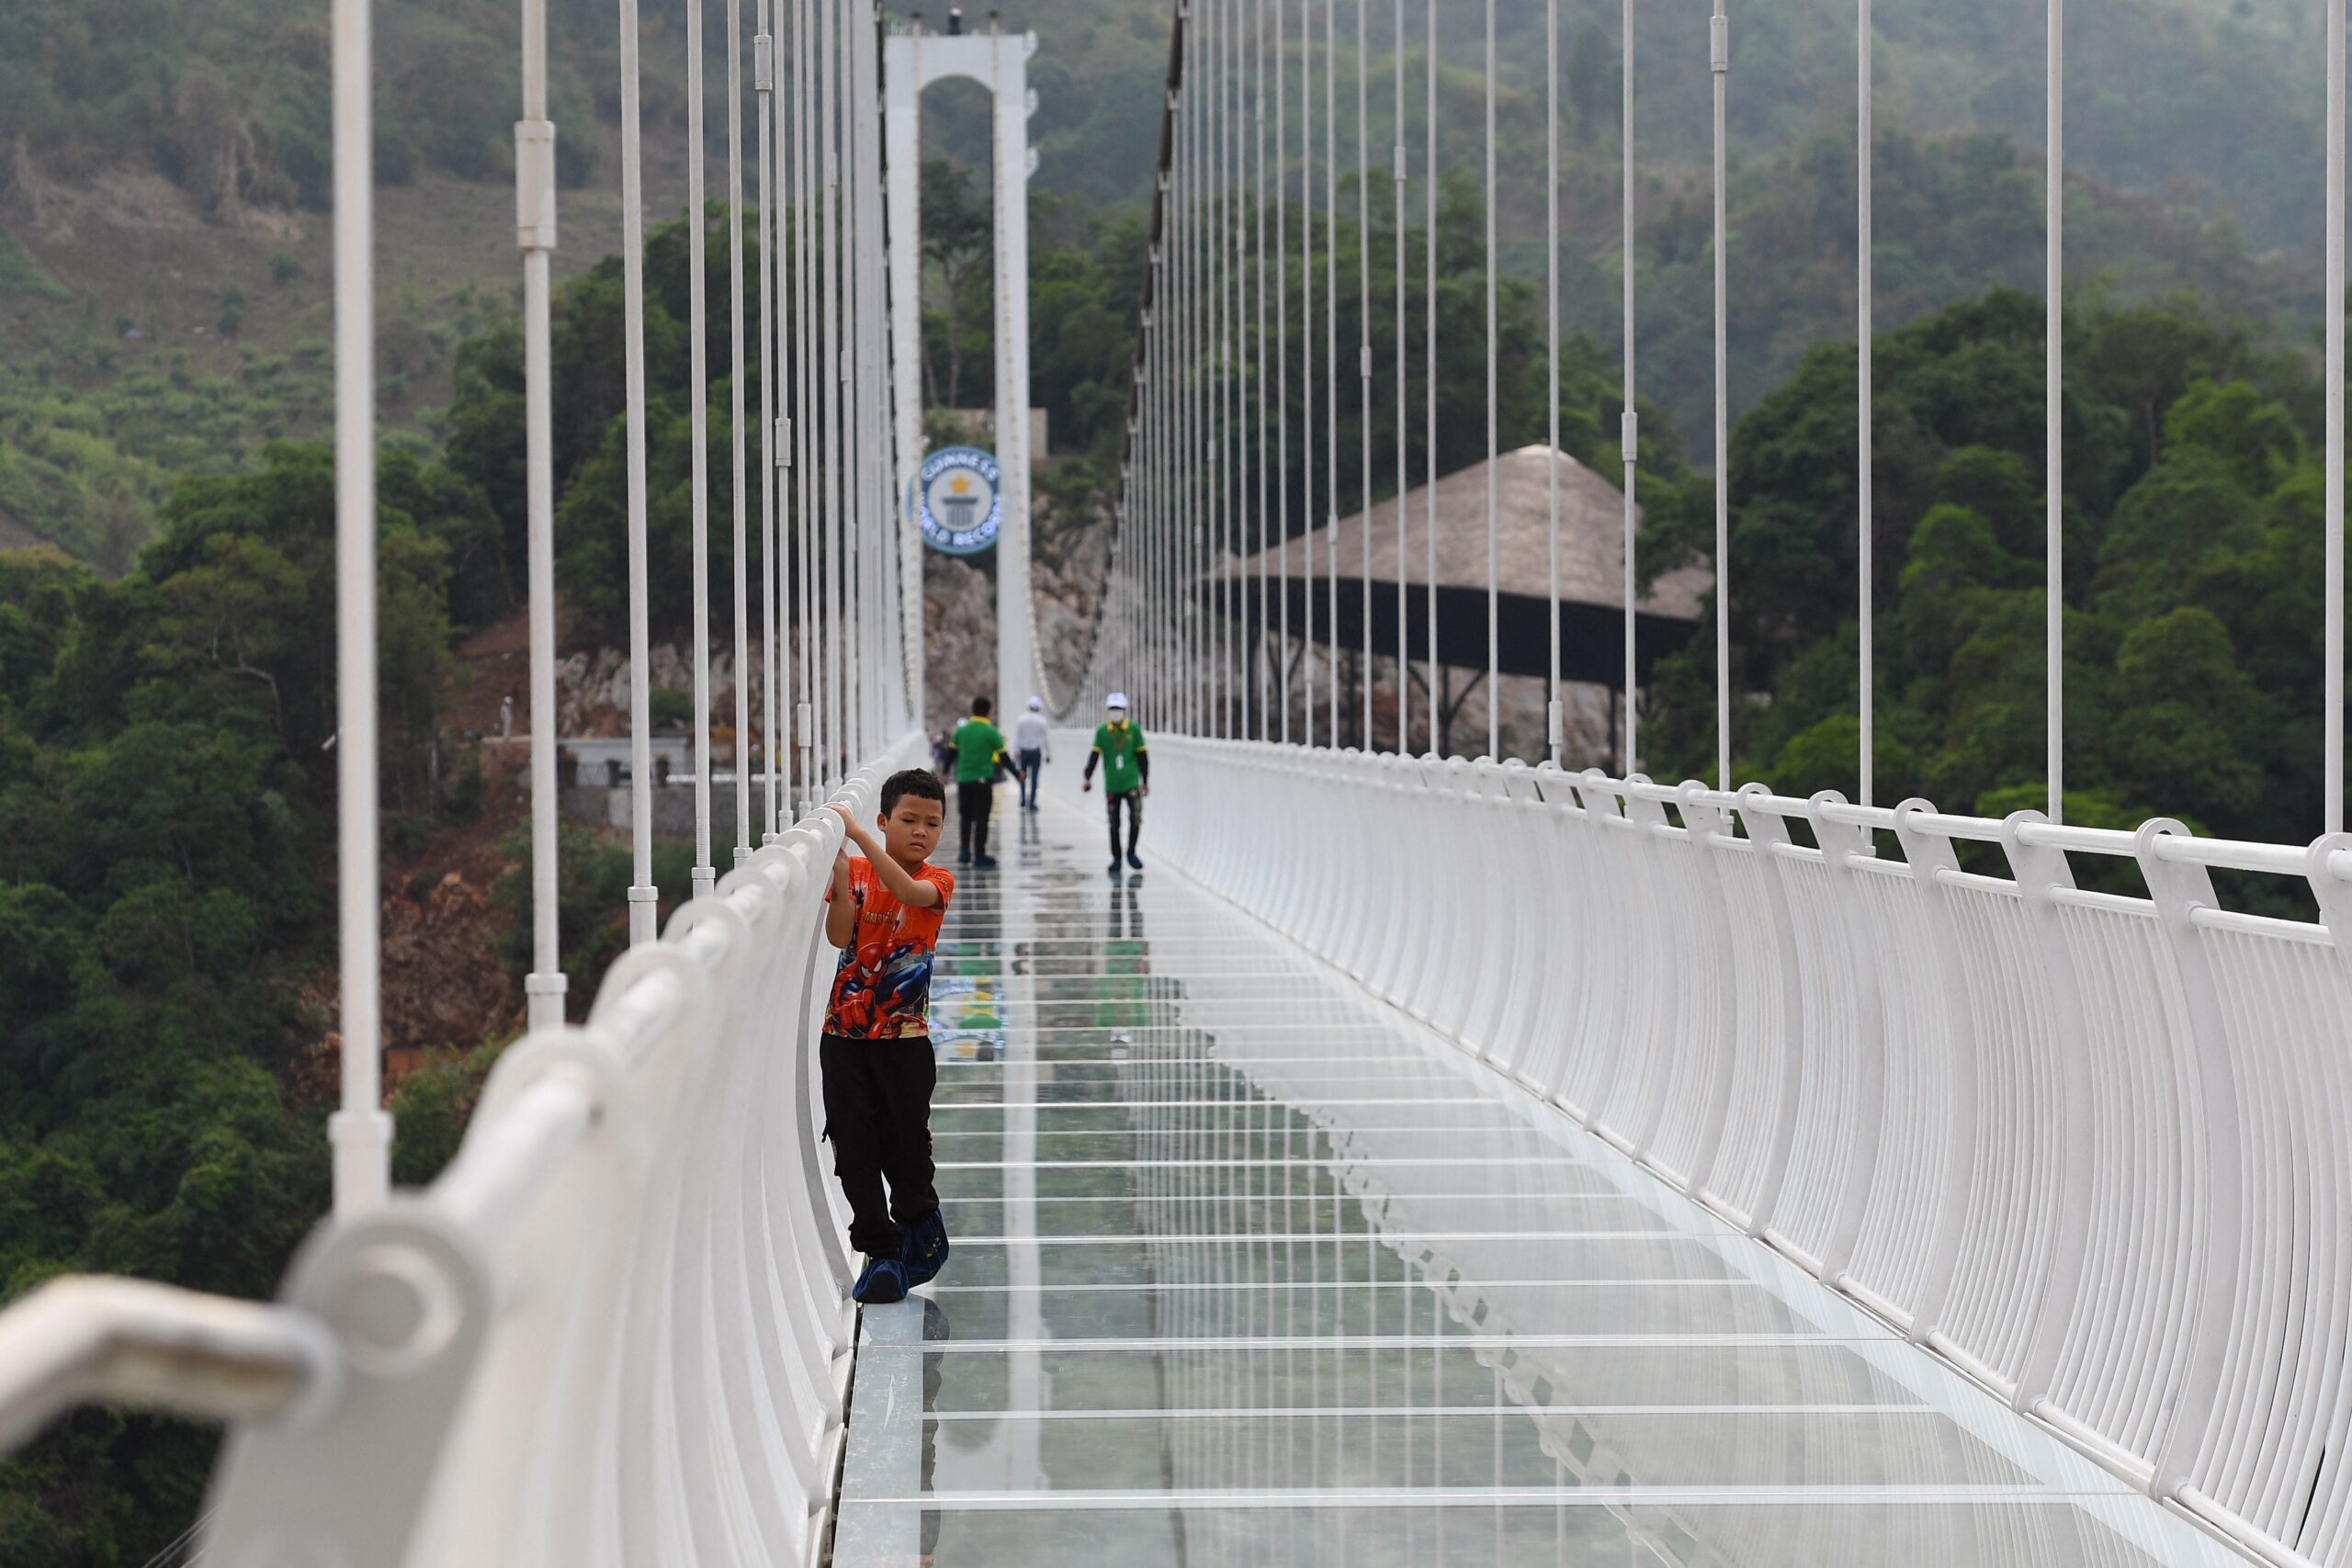 a child clings to the railing on the Bach Long glass bridge in the Moc Chau district in Vietnam&#39;s Son La province